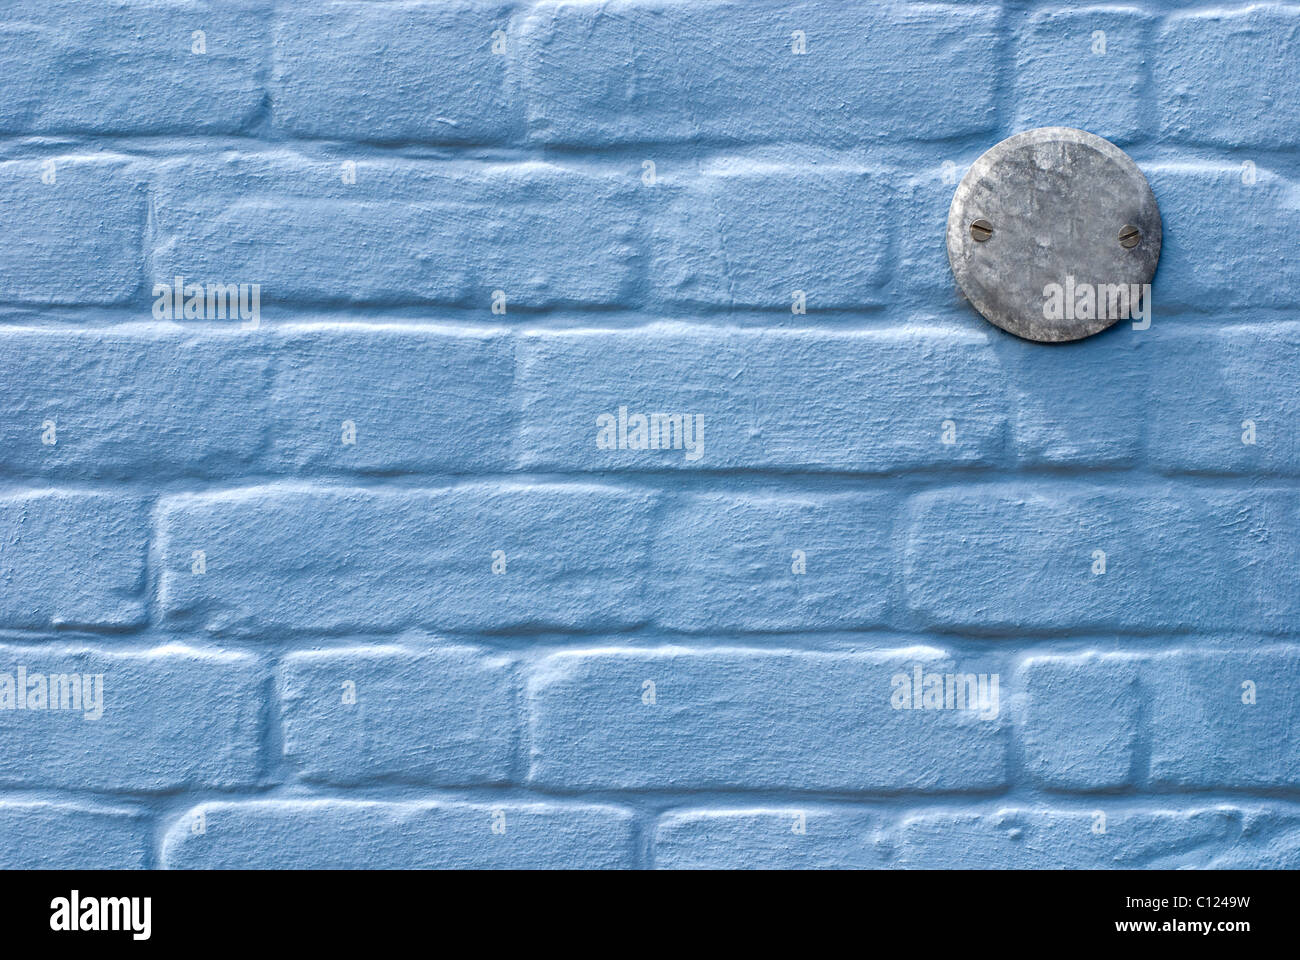 Blue wall with number plate. Suffolk. England. Stock Photo